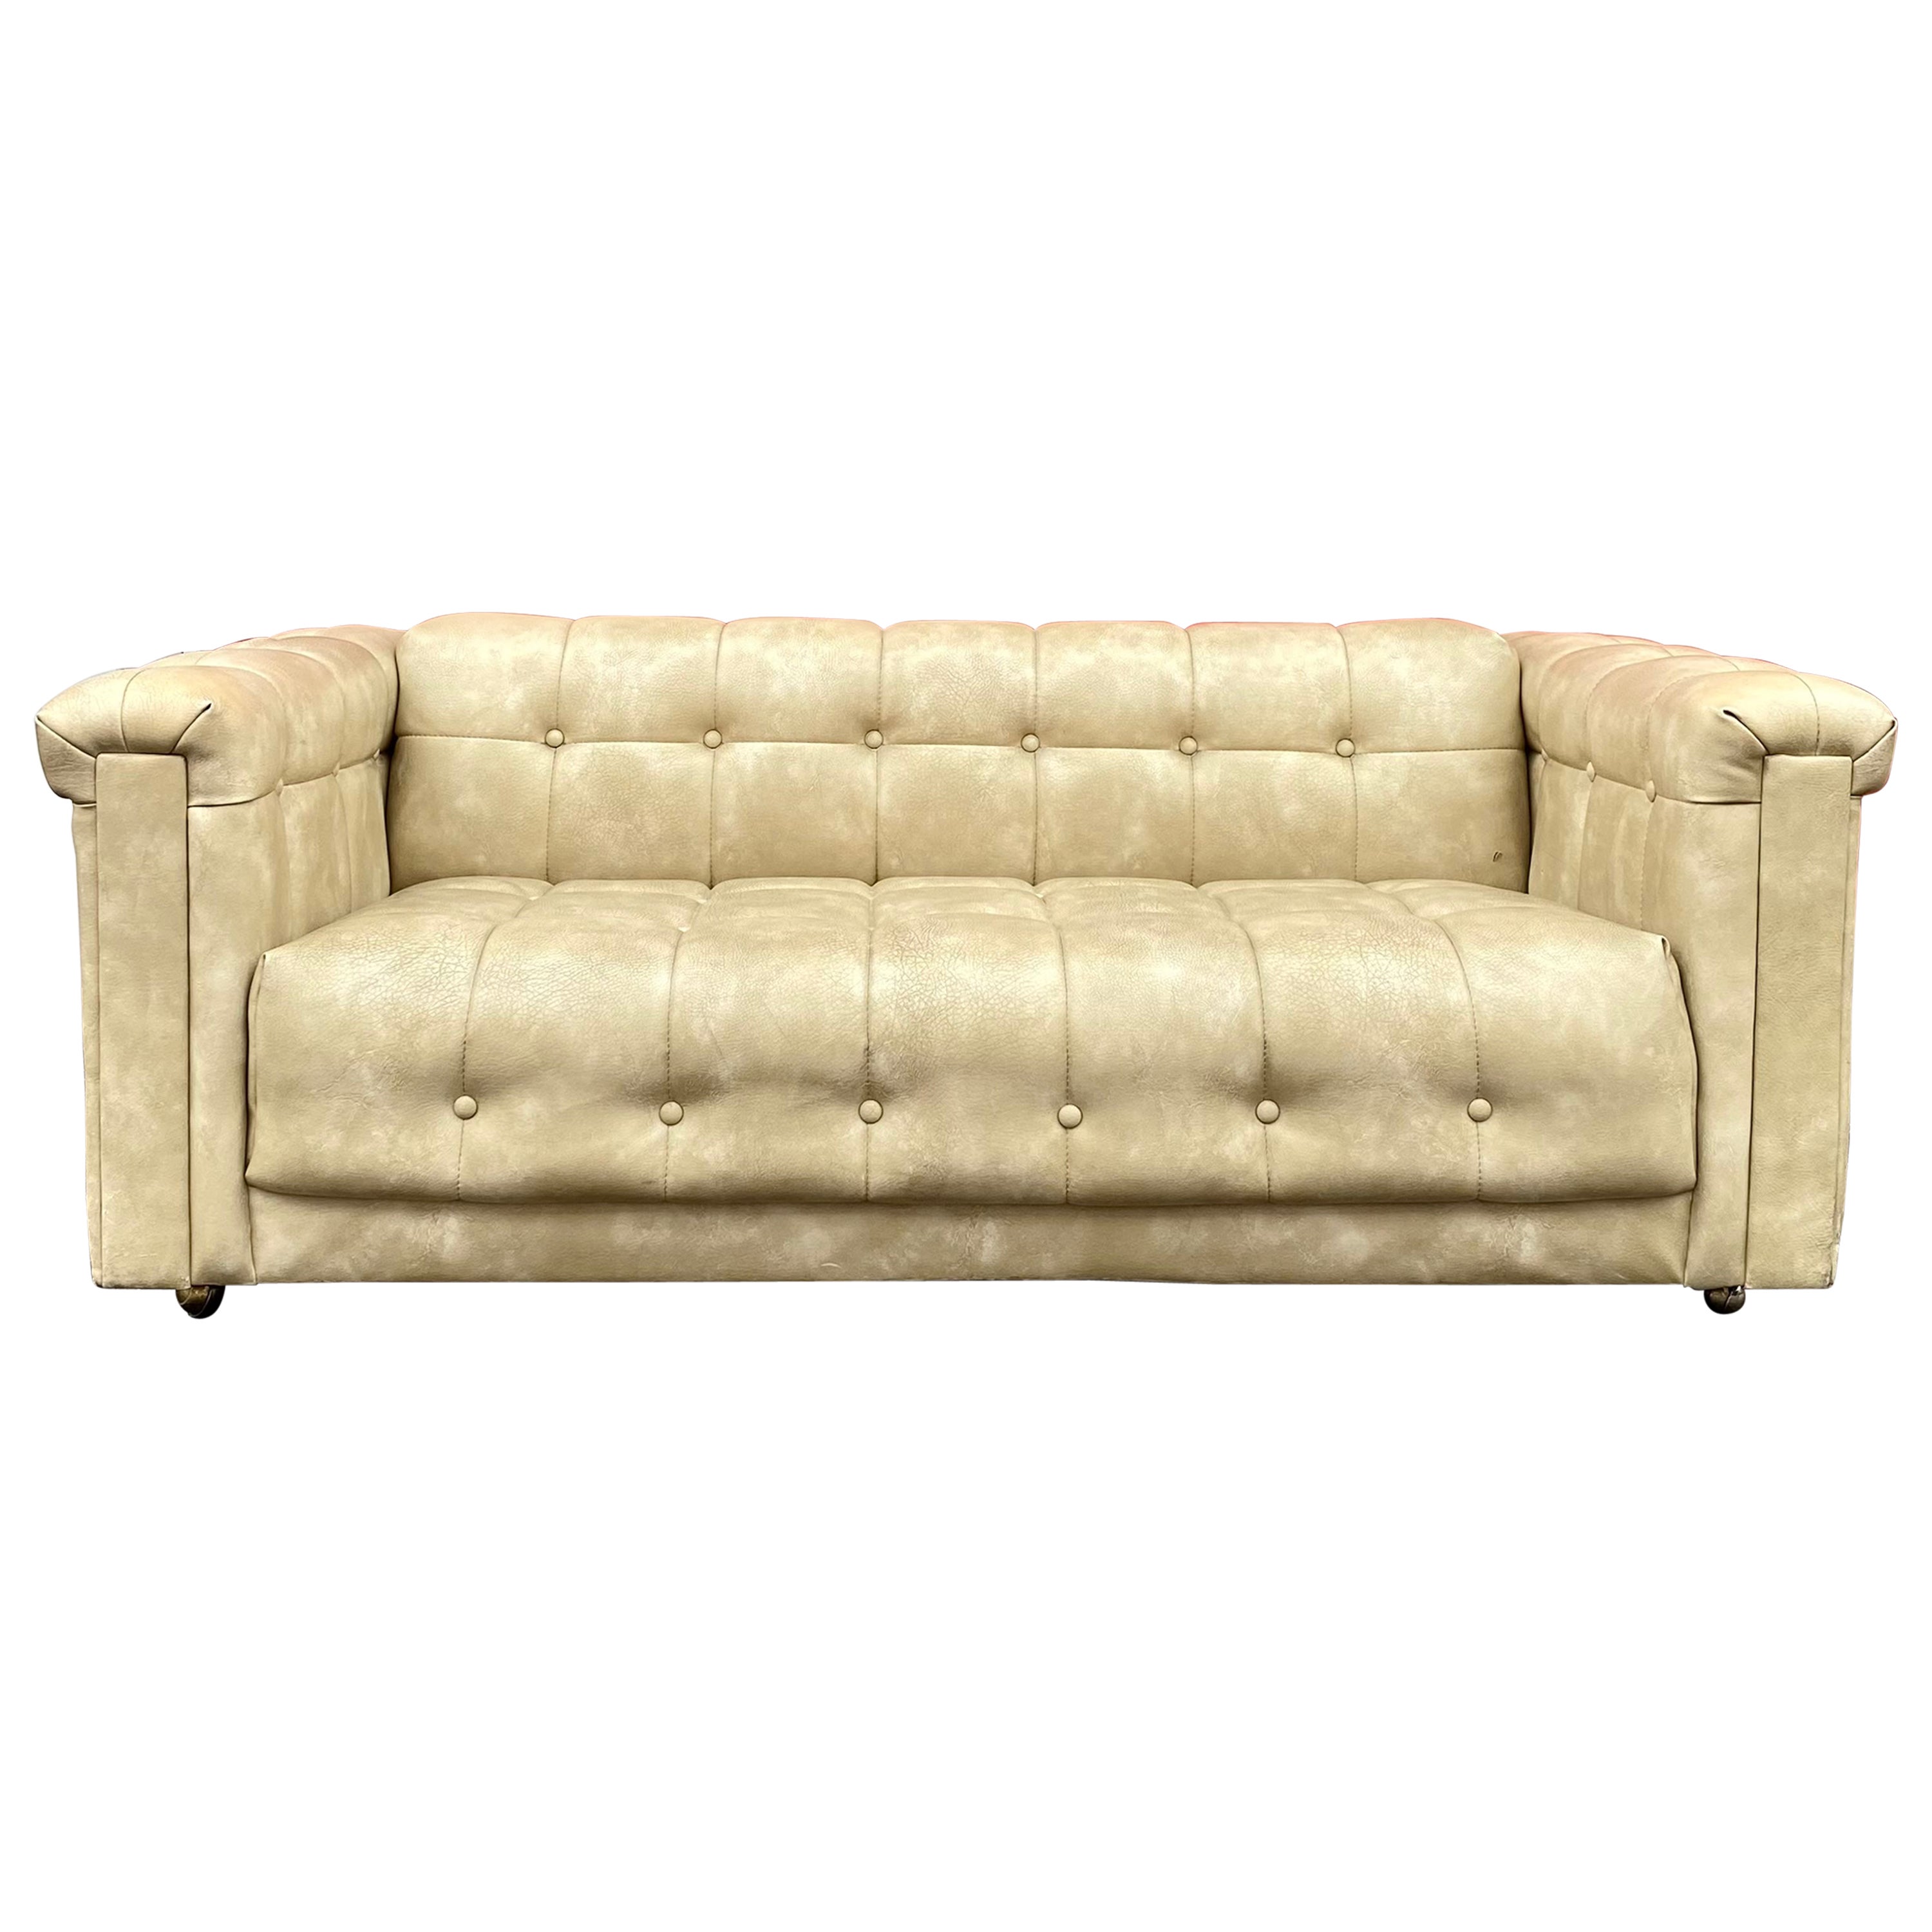 1960s Milo Baughman Style Button-Tufted Biscuit Distressed Sofa